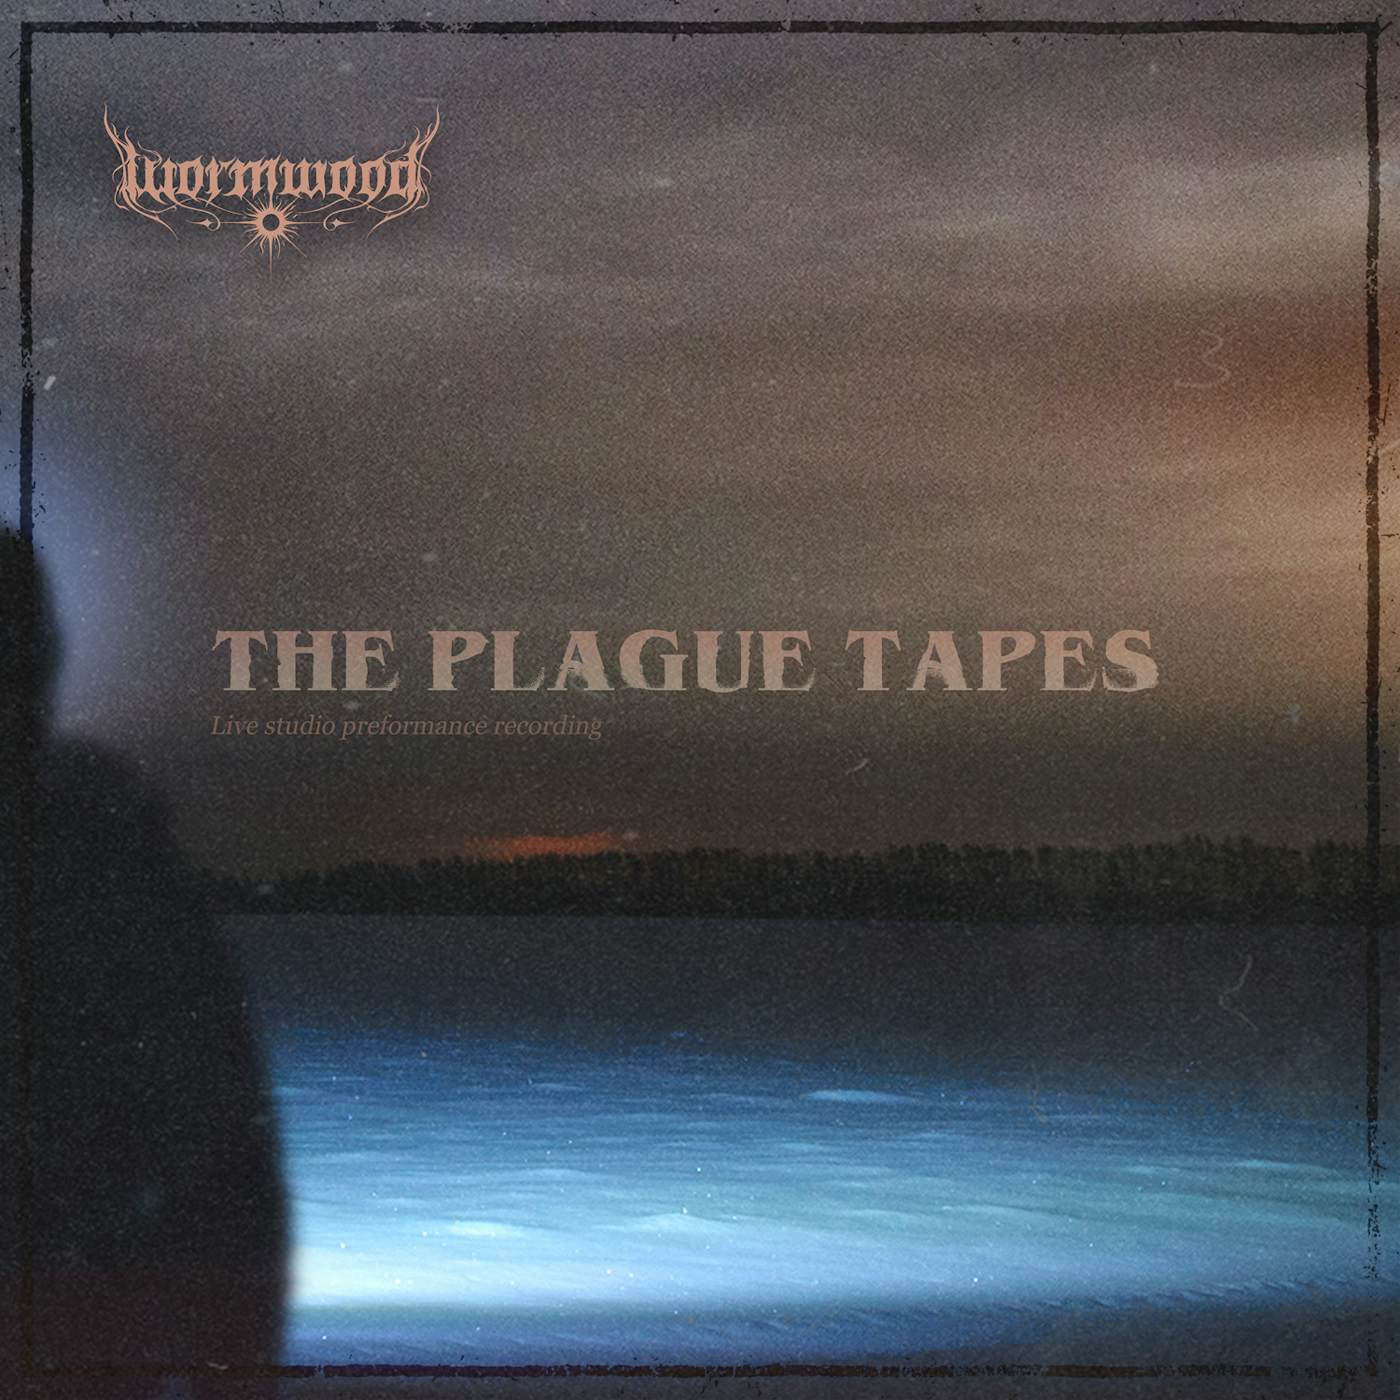 Wormwood Plague Tapes CD